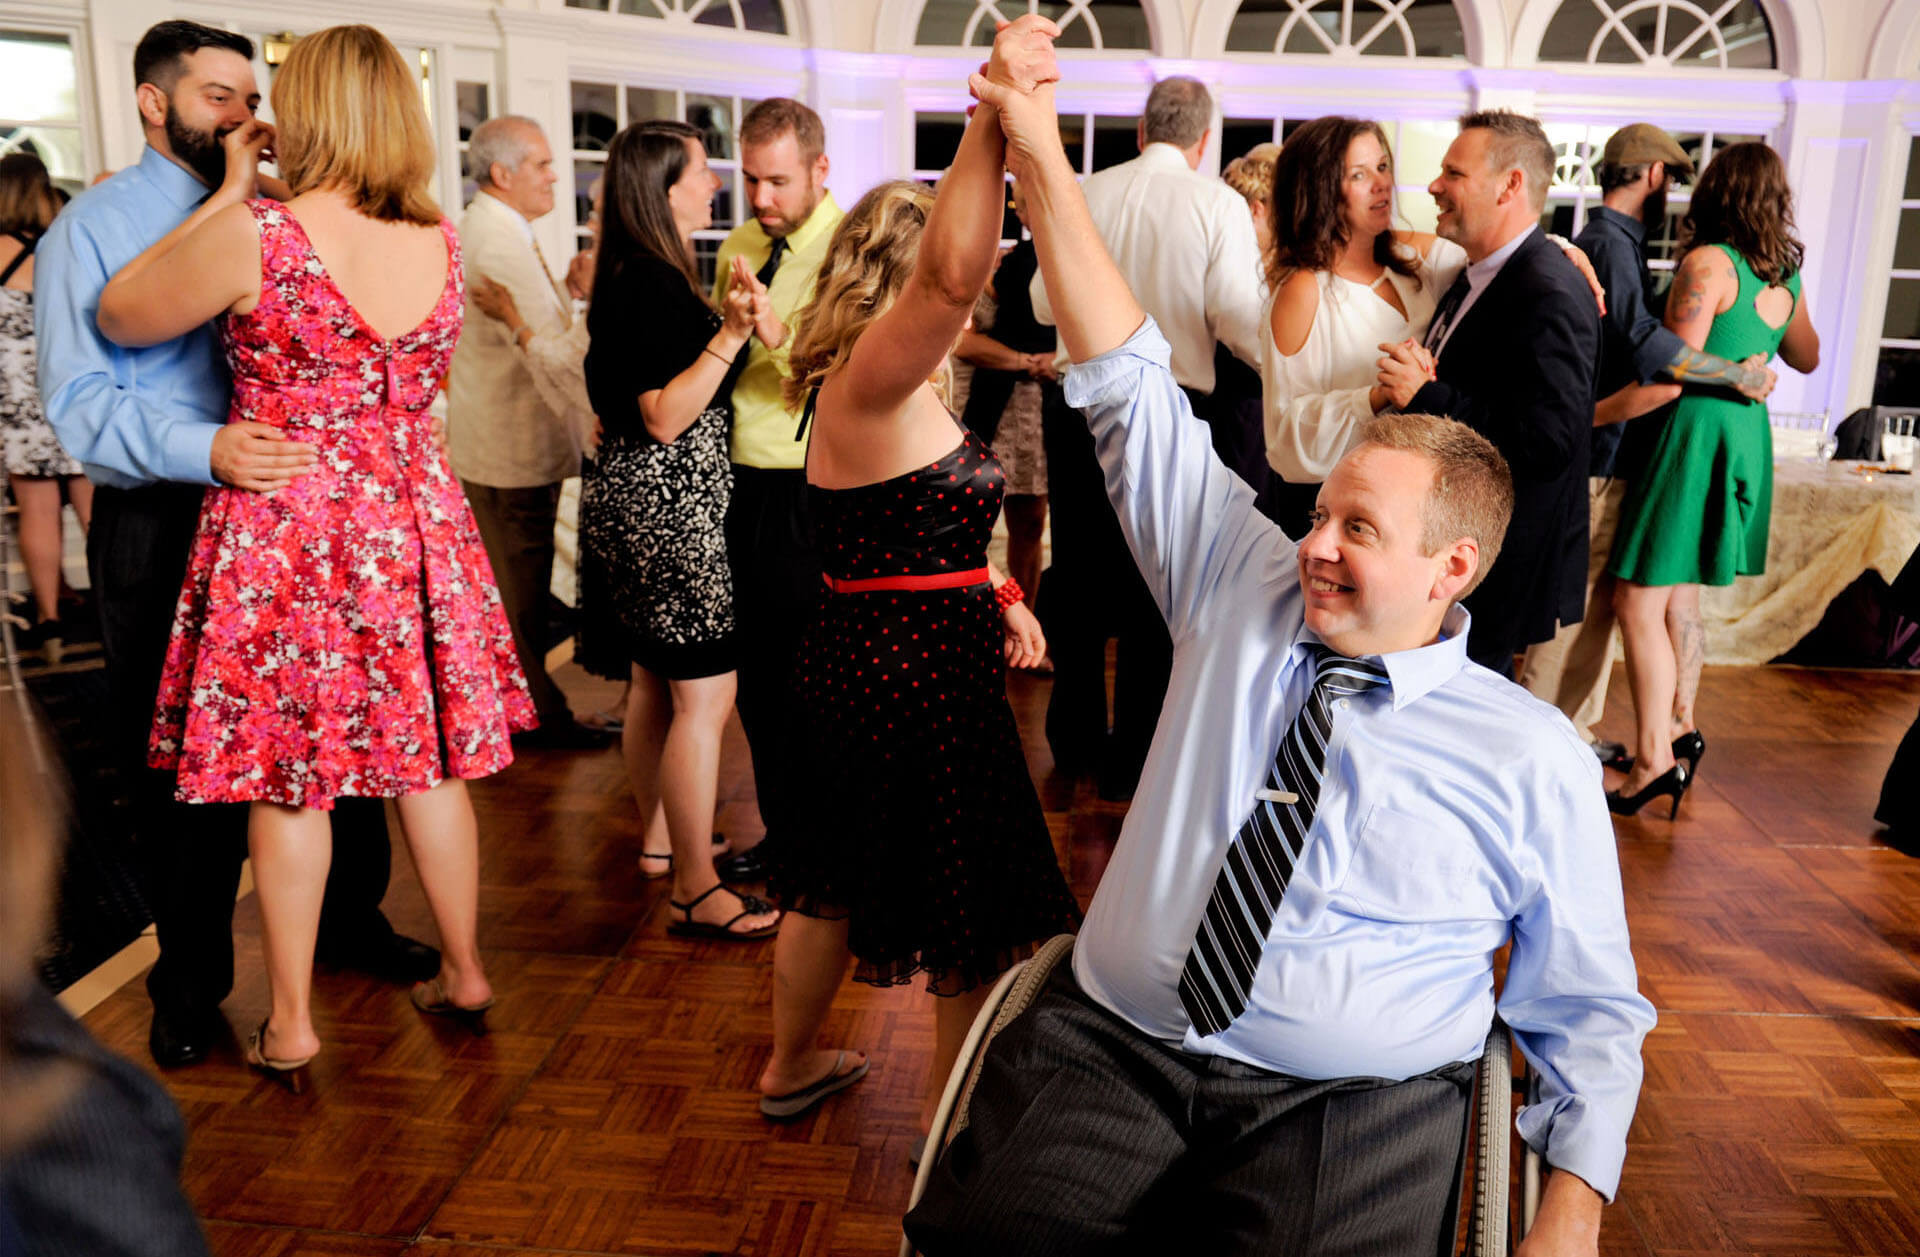 A couple dance on the tight dance floor at Cherry Creek in Shelby Charter Township, Michigan and manage to dance at the wedding reception easily navigating the guest's wheelchair.